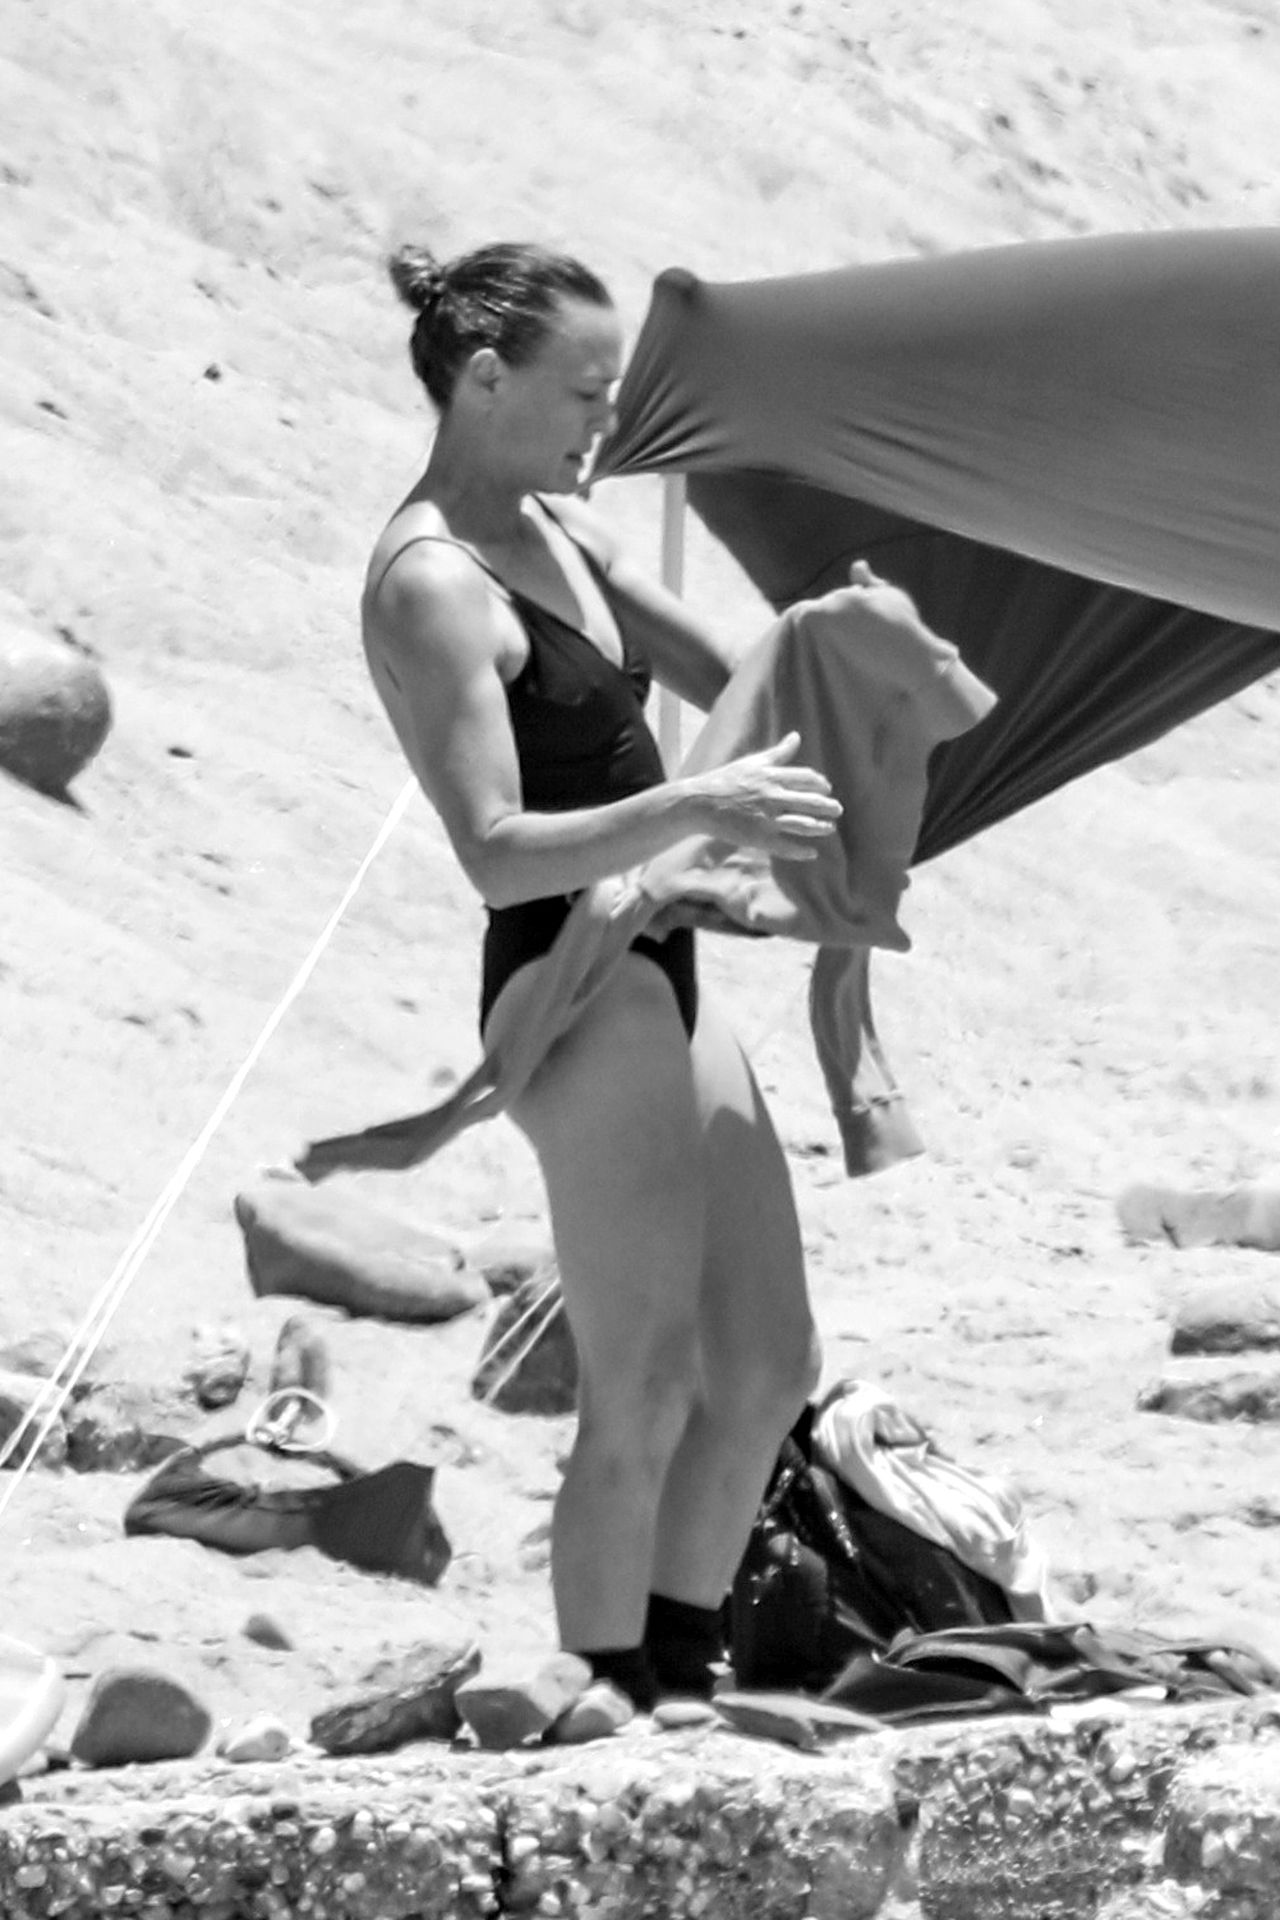 Robin Wright & Clement Giraudet are a Surfing Couple (91 Photos)